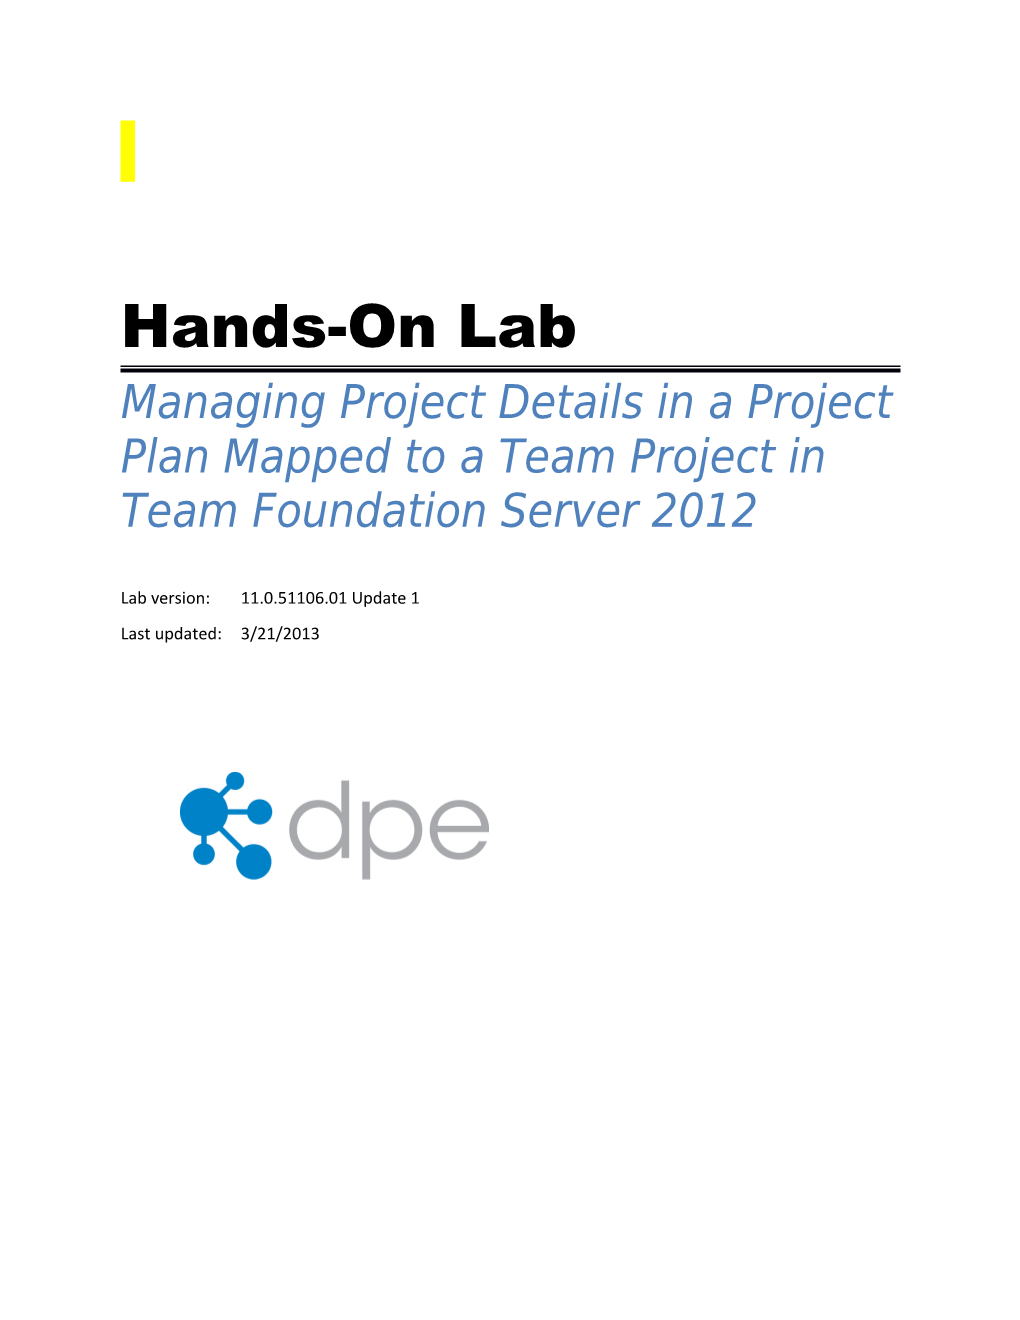 Managing Project Details in a Project Plan Mapped to a Team Project in Team Foundation